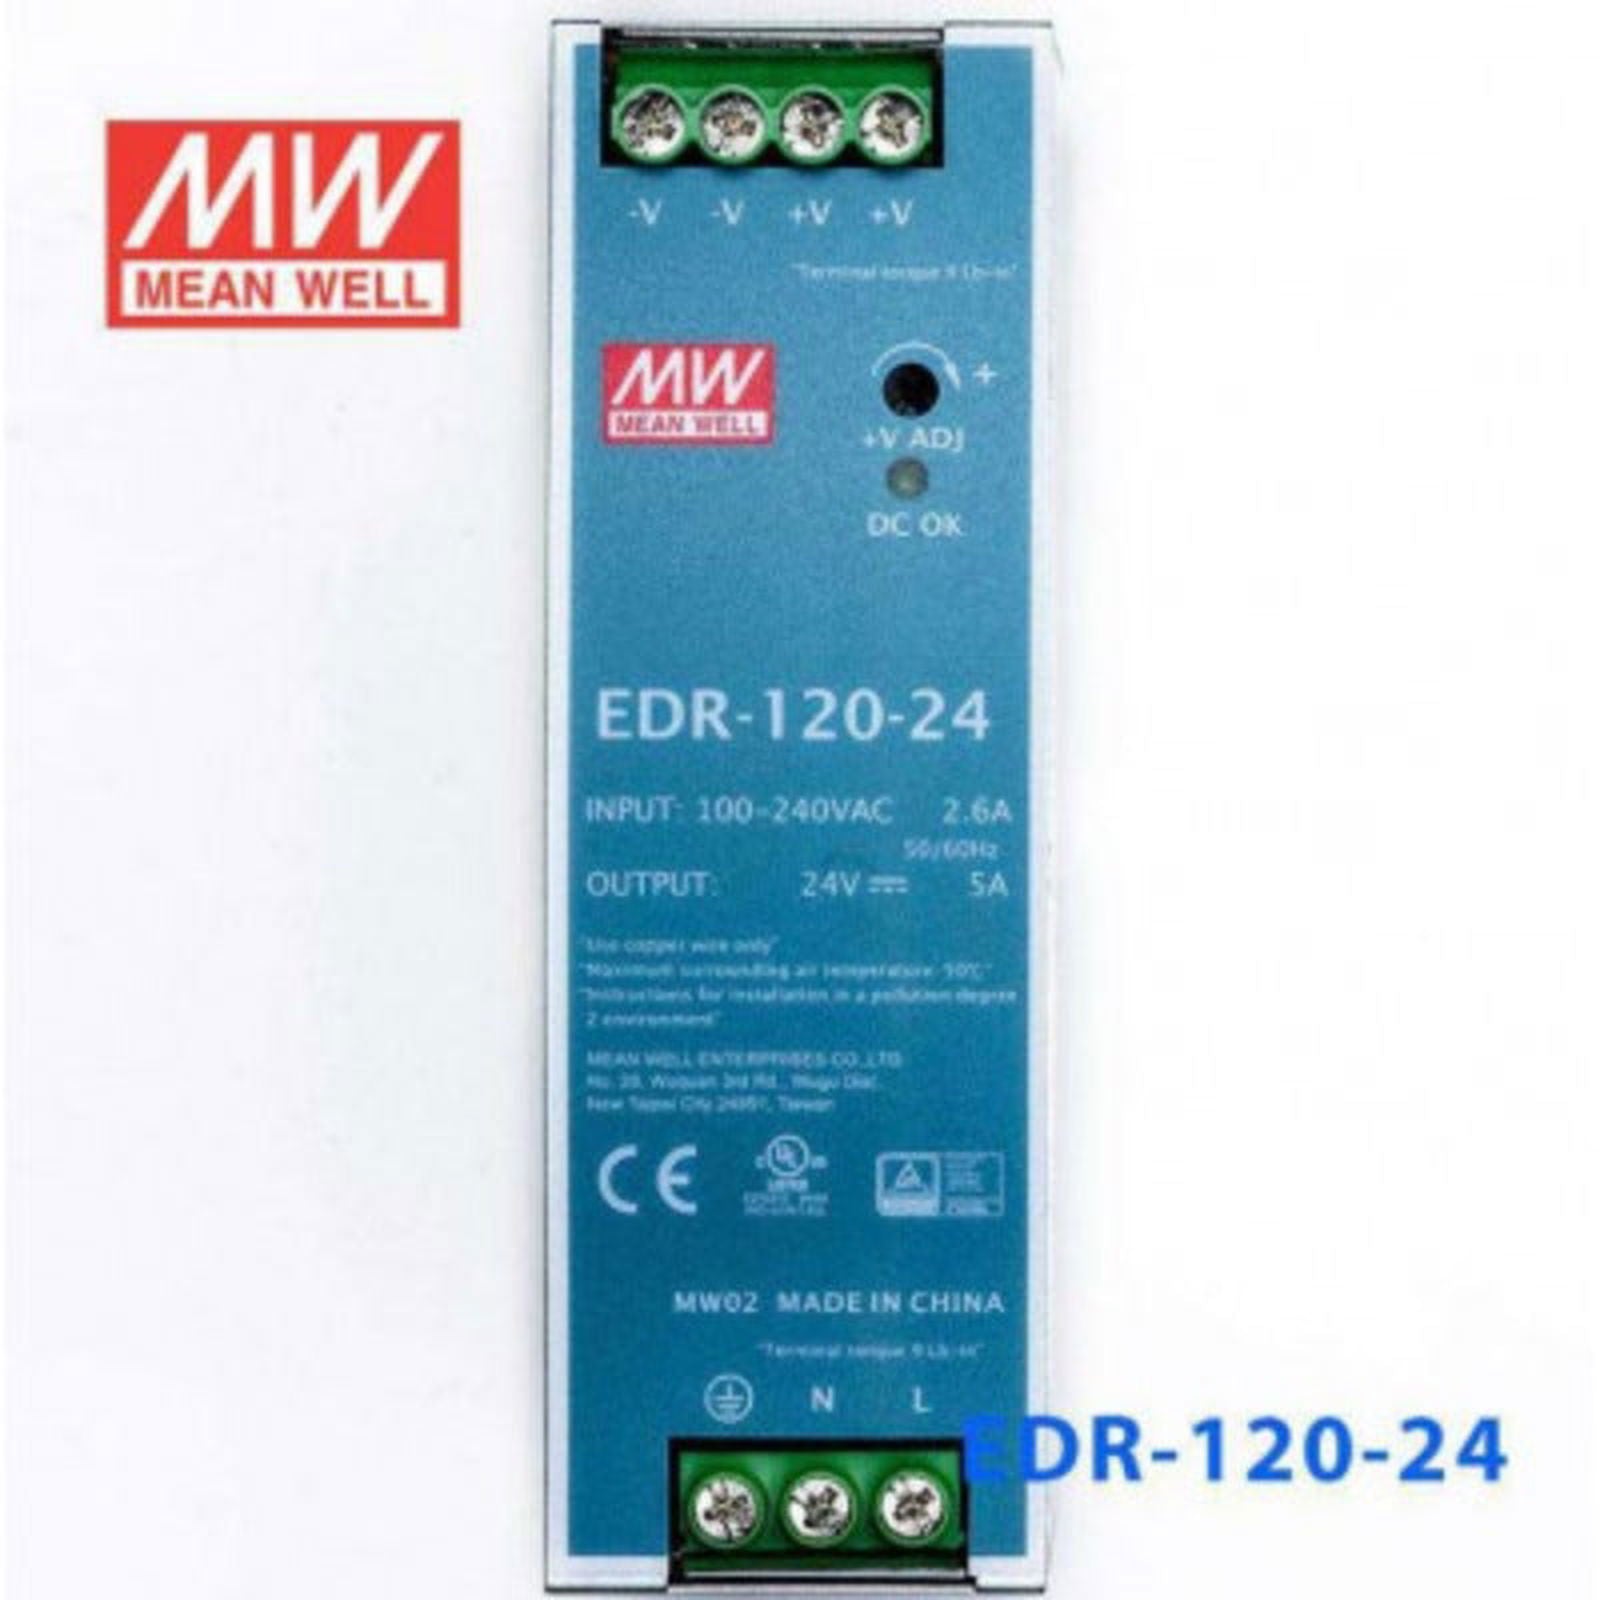 EDR-120-24 Mean Well SMPS 24V 5A DIN Rail Power Supply | Reliable Industrial Solution - voltkart -  - 